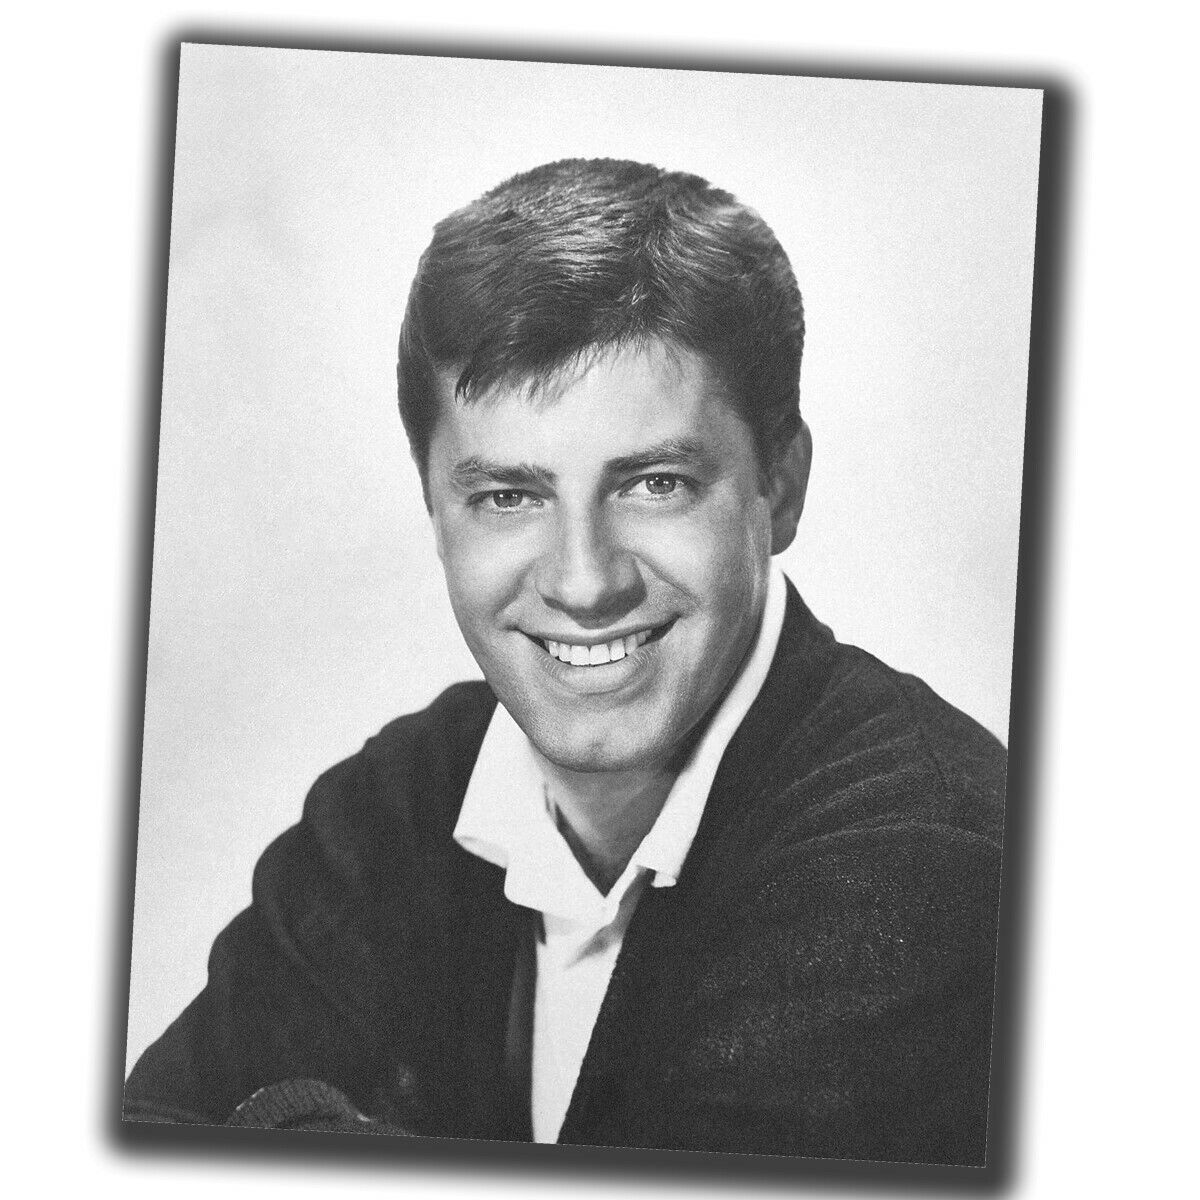 Jerry Lewis FINE ART Celebrities Vintage Rare Photo Glossy Big Size 8X10in D044